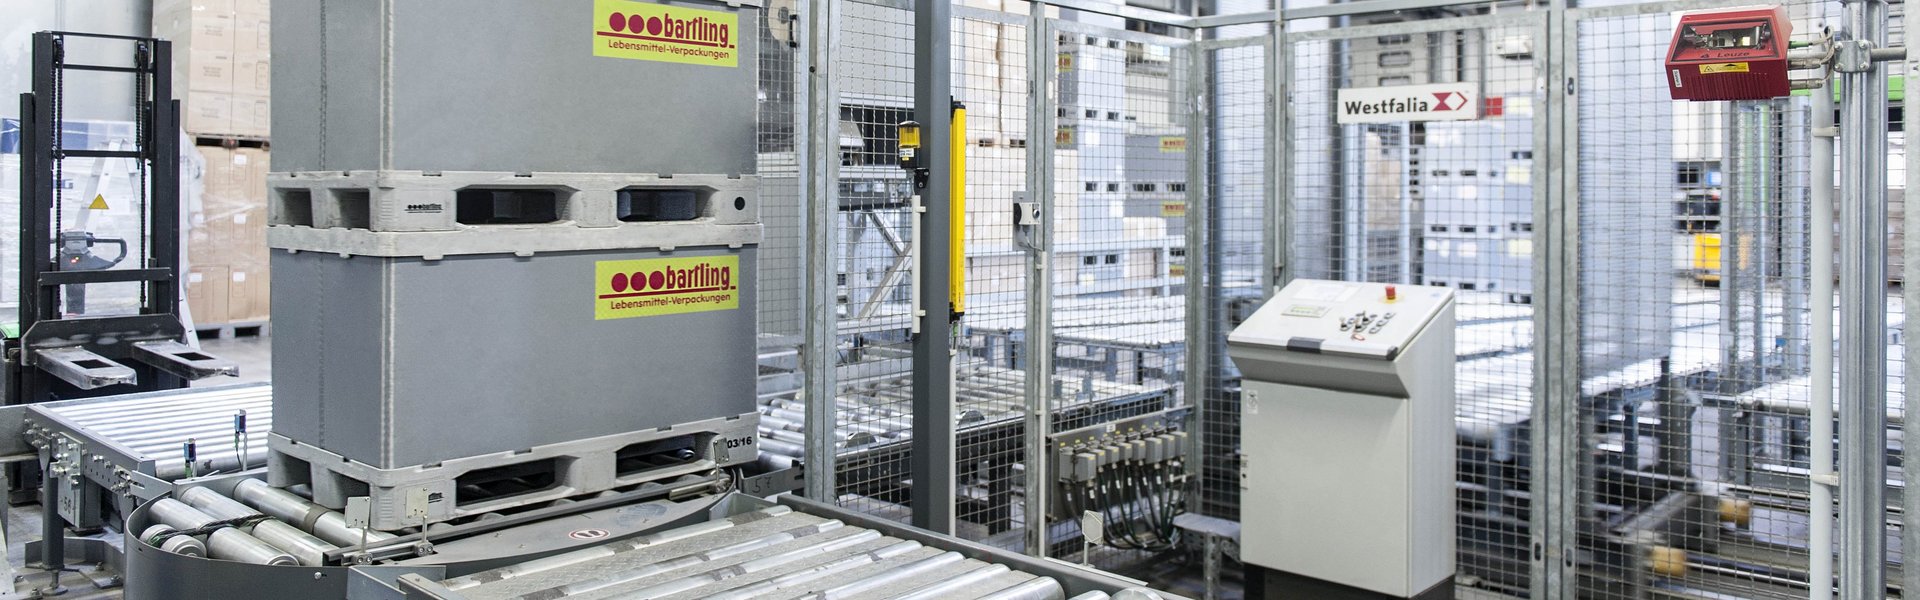 Boxes on automated conveyor technology, Bartling Verpackungen